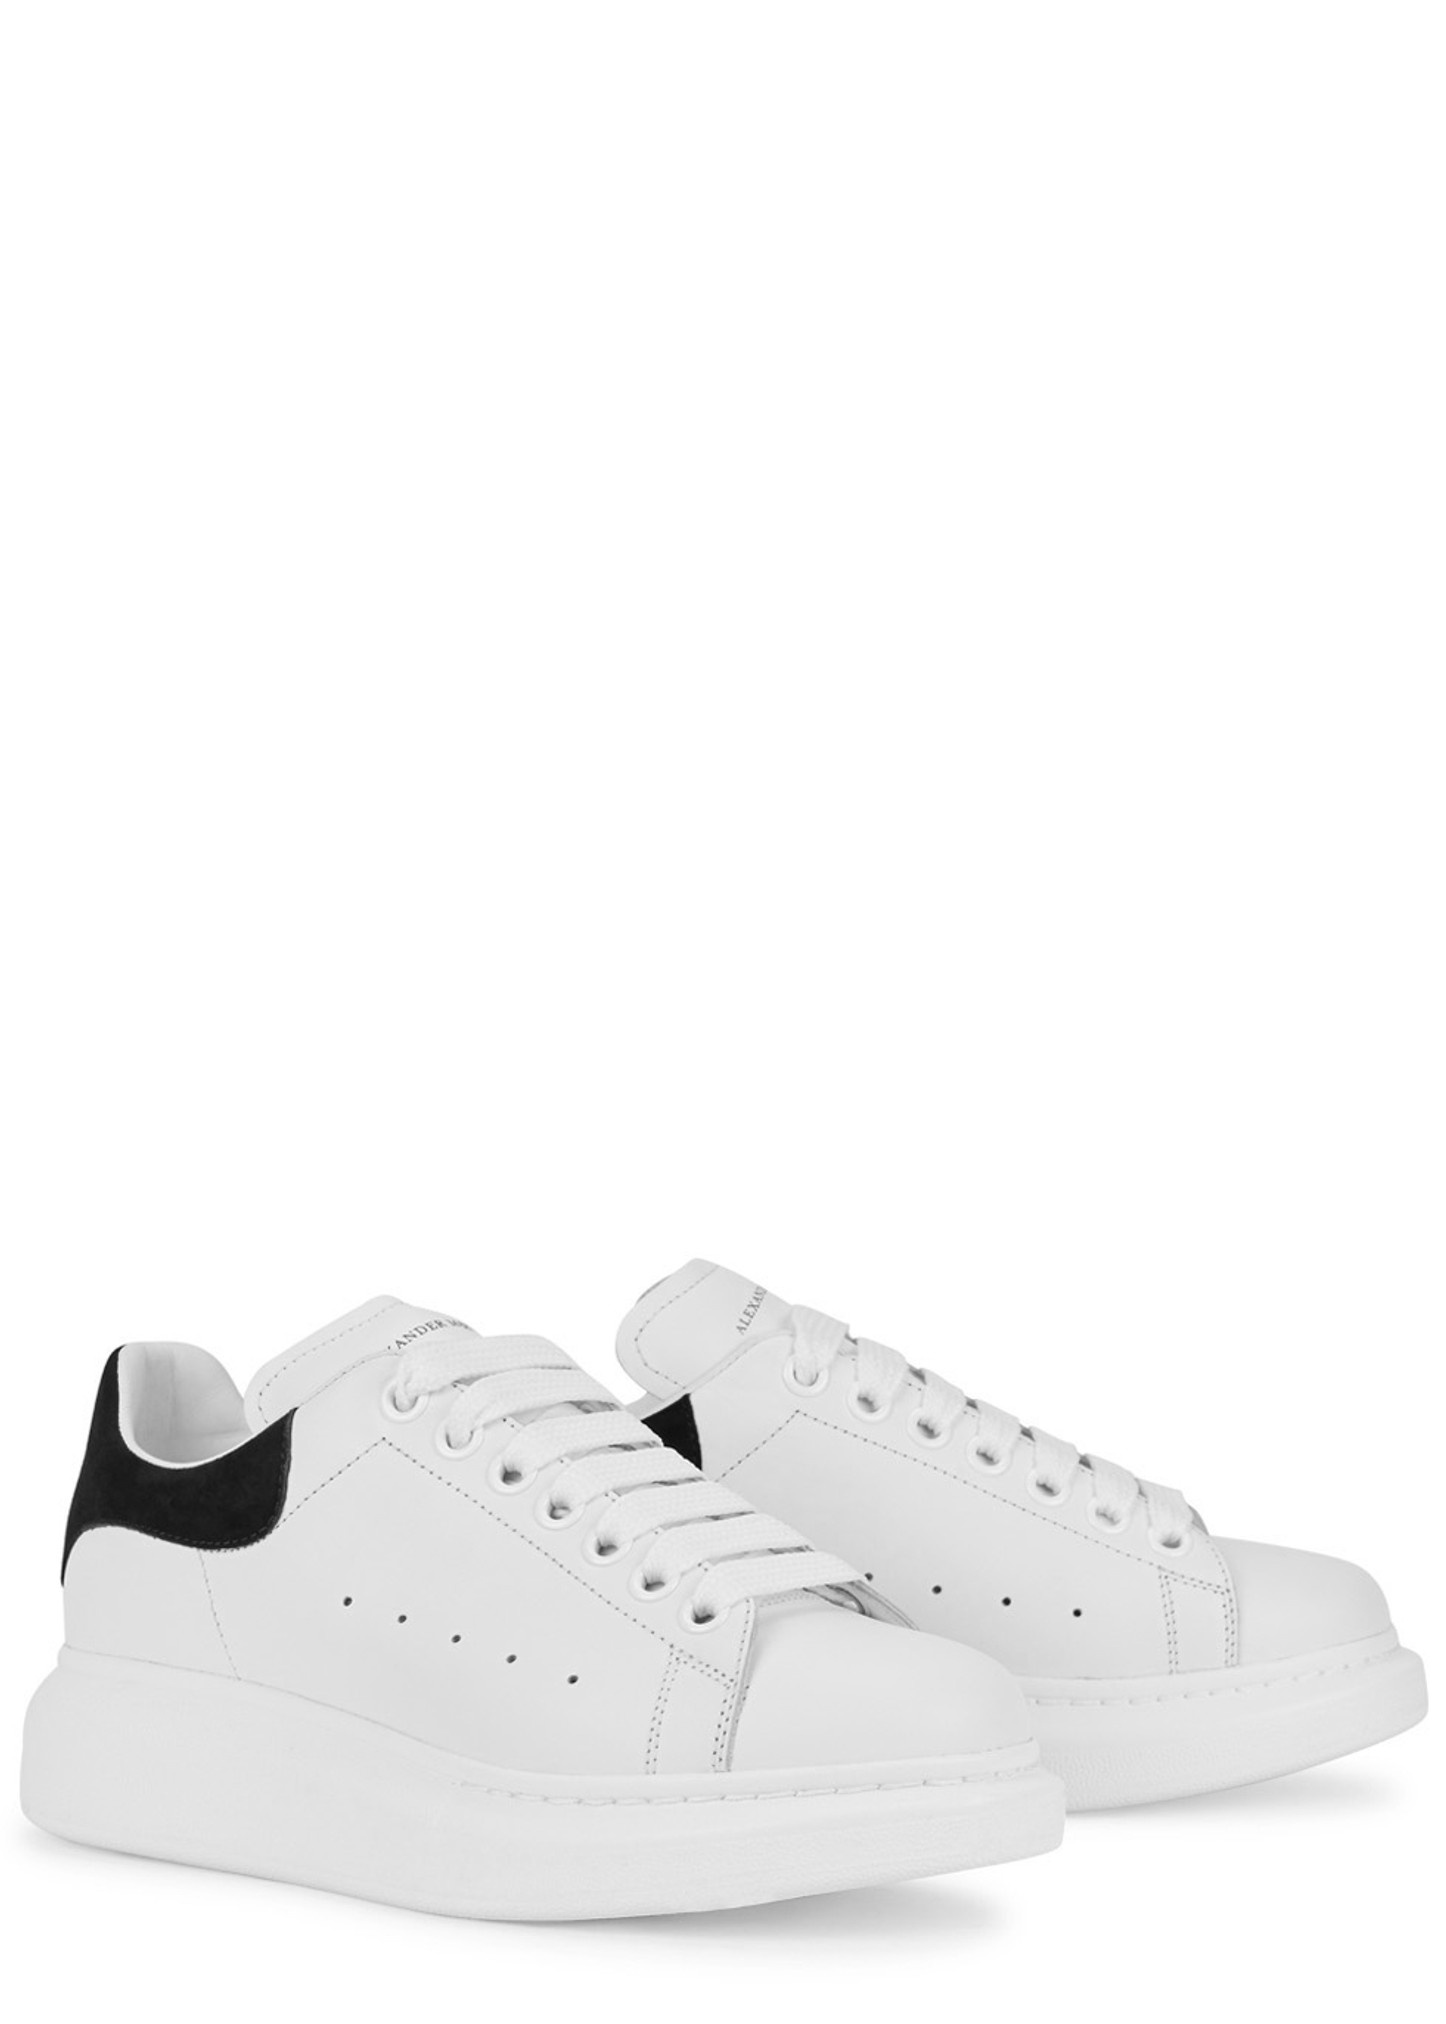 Oversized white leather sneakers - 2